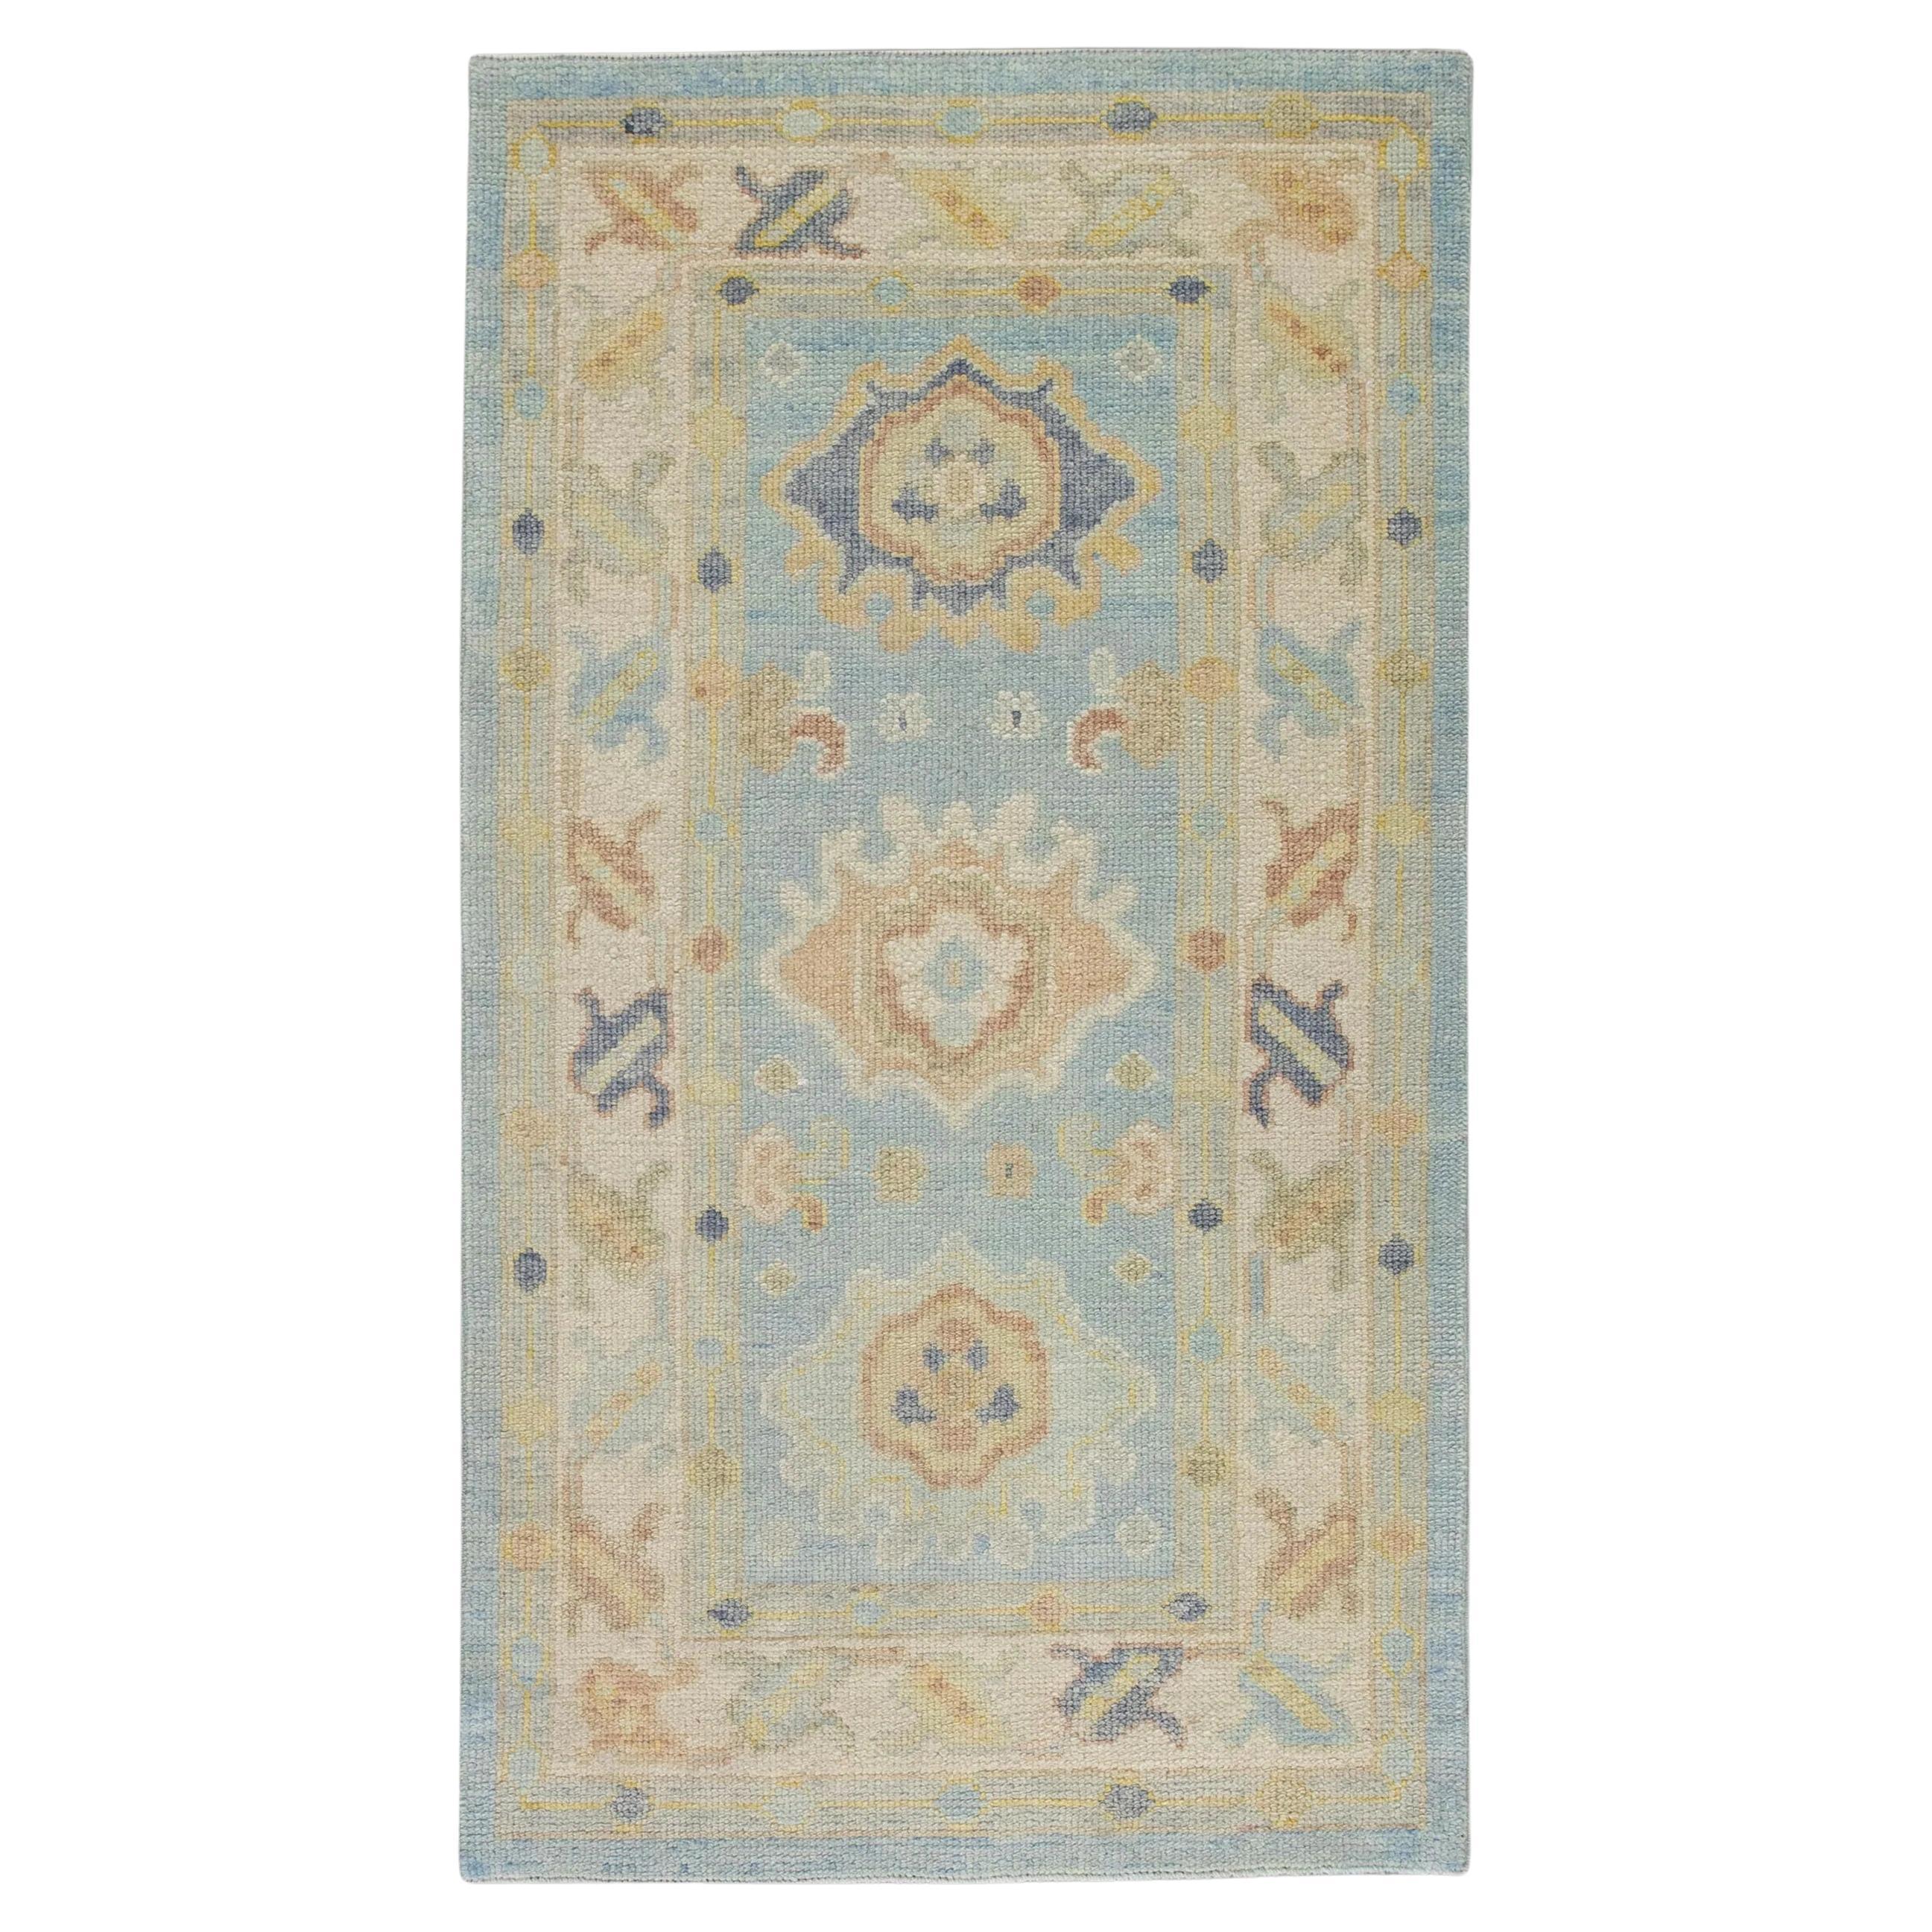 Geometric Floral Handwoven Turkish Oushak Rug in Pastel Blue 2'10" x 5'2" For Sale